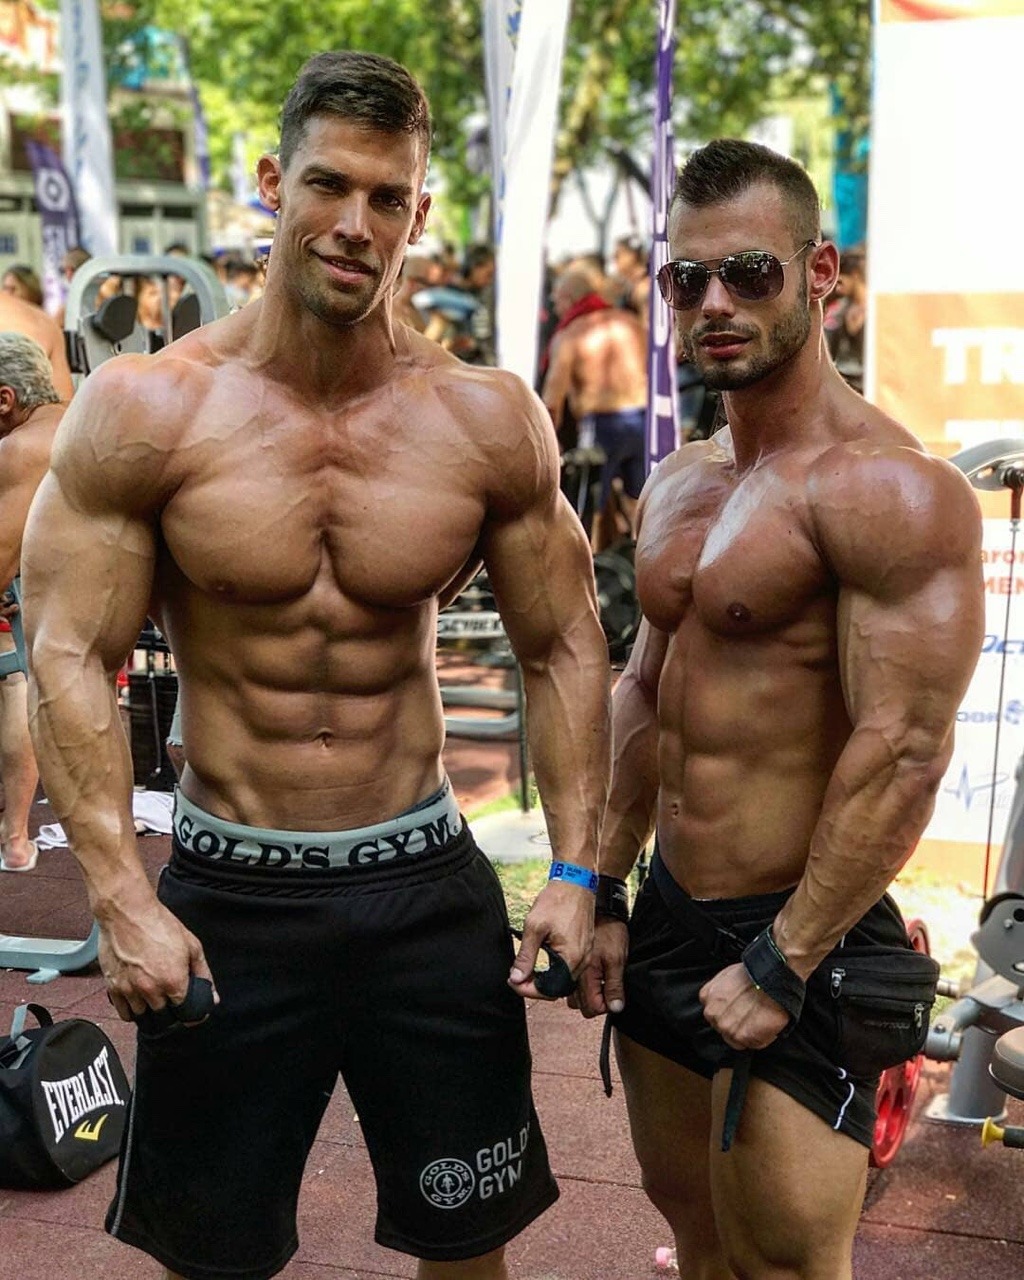 Bodybuilder Male Porn Star - Muscle â€” Yet another gay porn star turned bodybuilder. I...